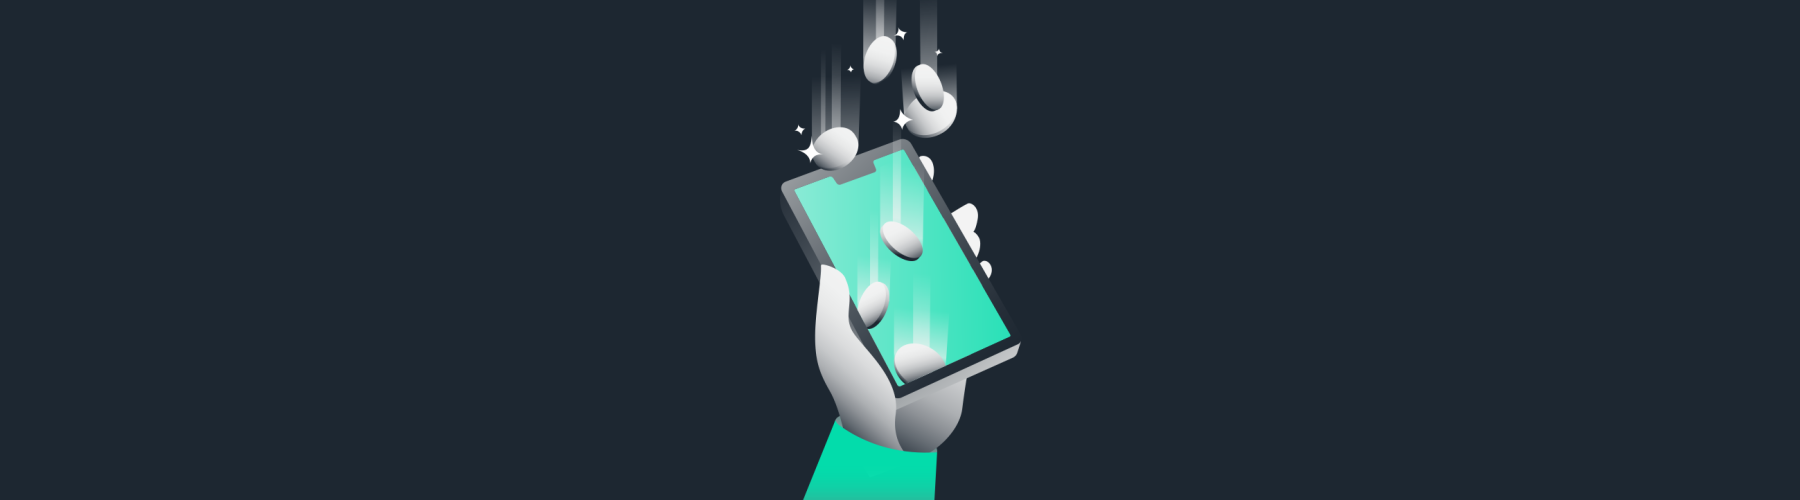 Illustration of a phone with money falling into it